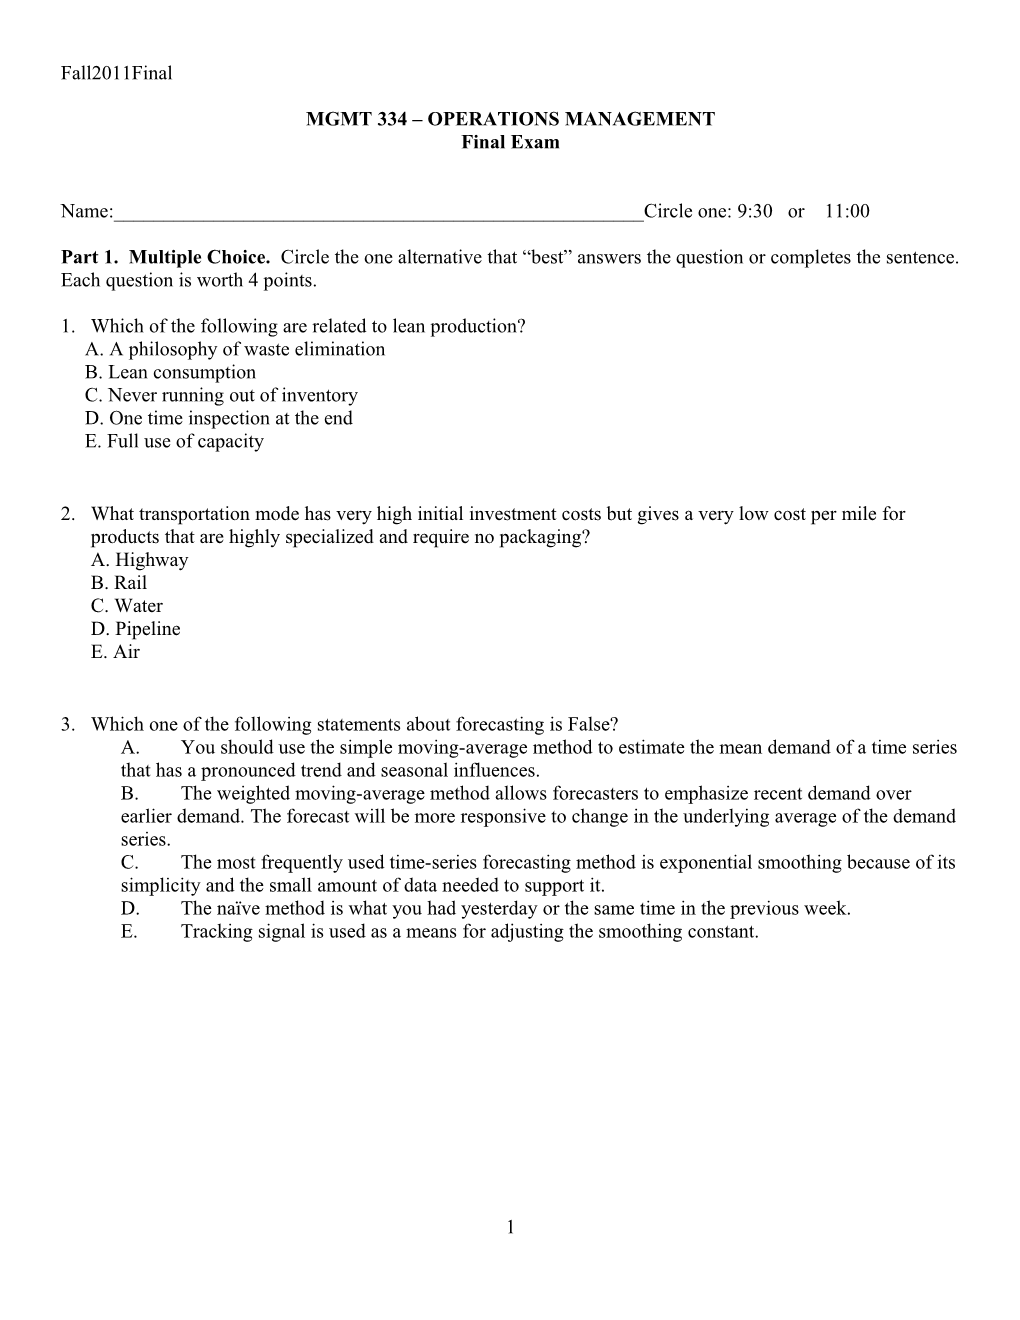 MGMT 334 OPERATIONS MANAGEMENT Final Exam